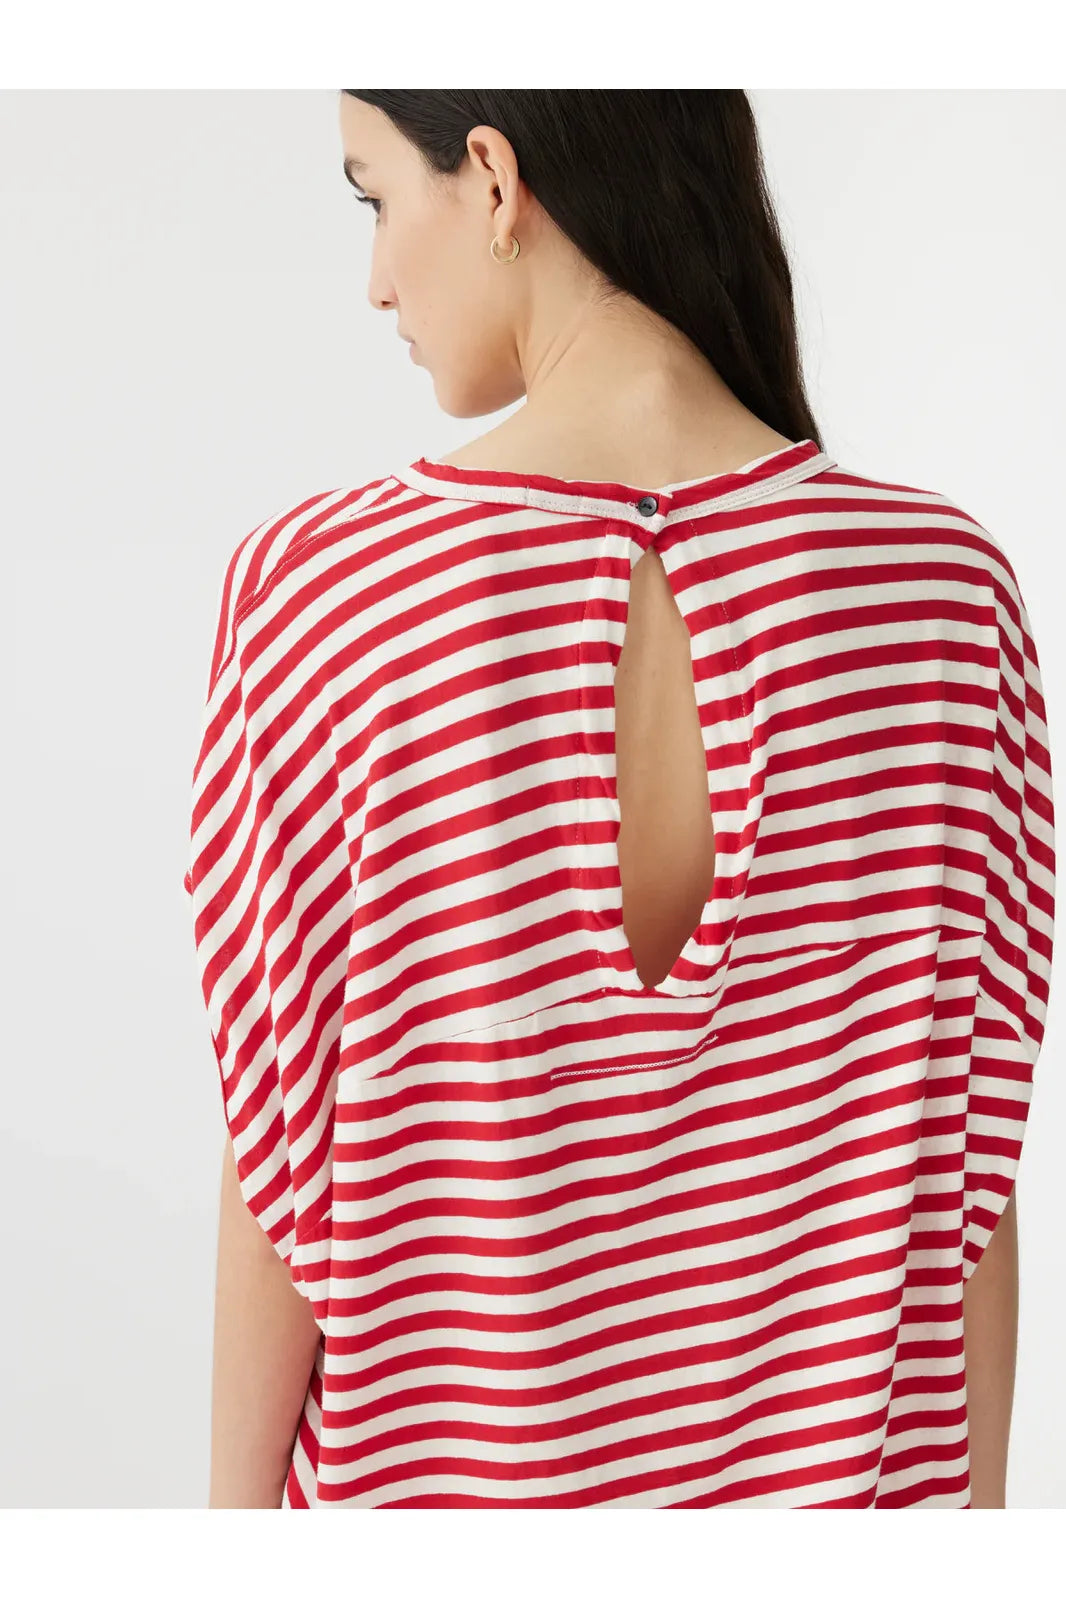 Stripe Slouch Circle Tank in Red/ Undyed by Bassike